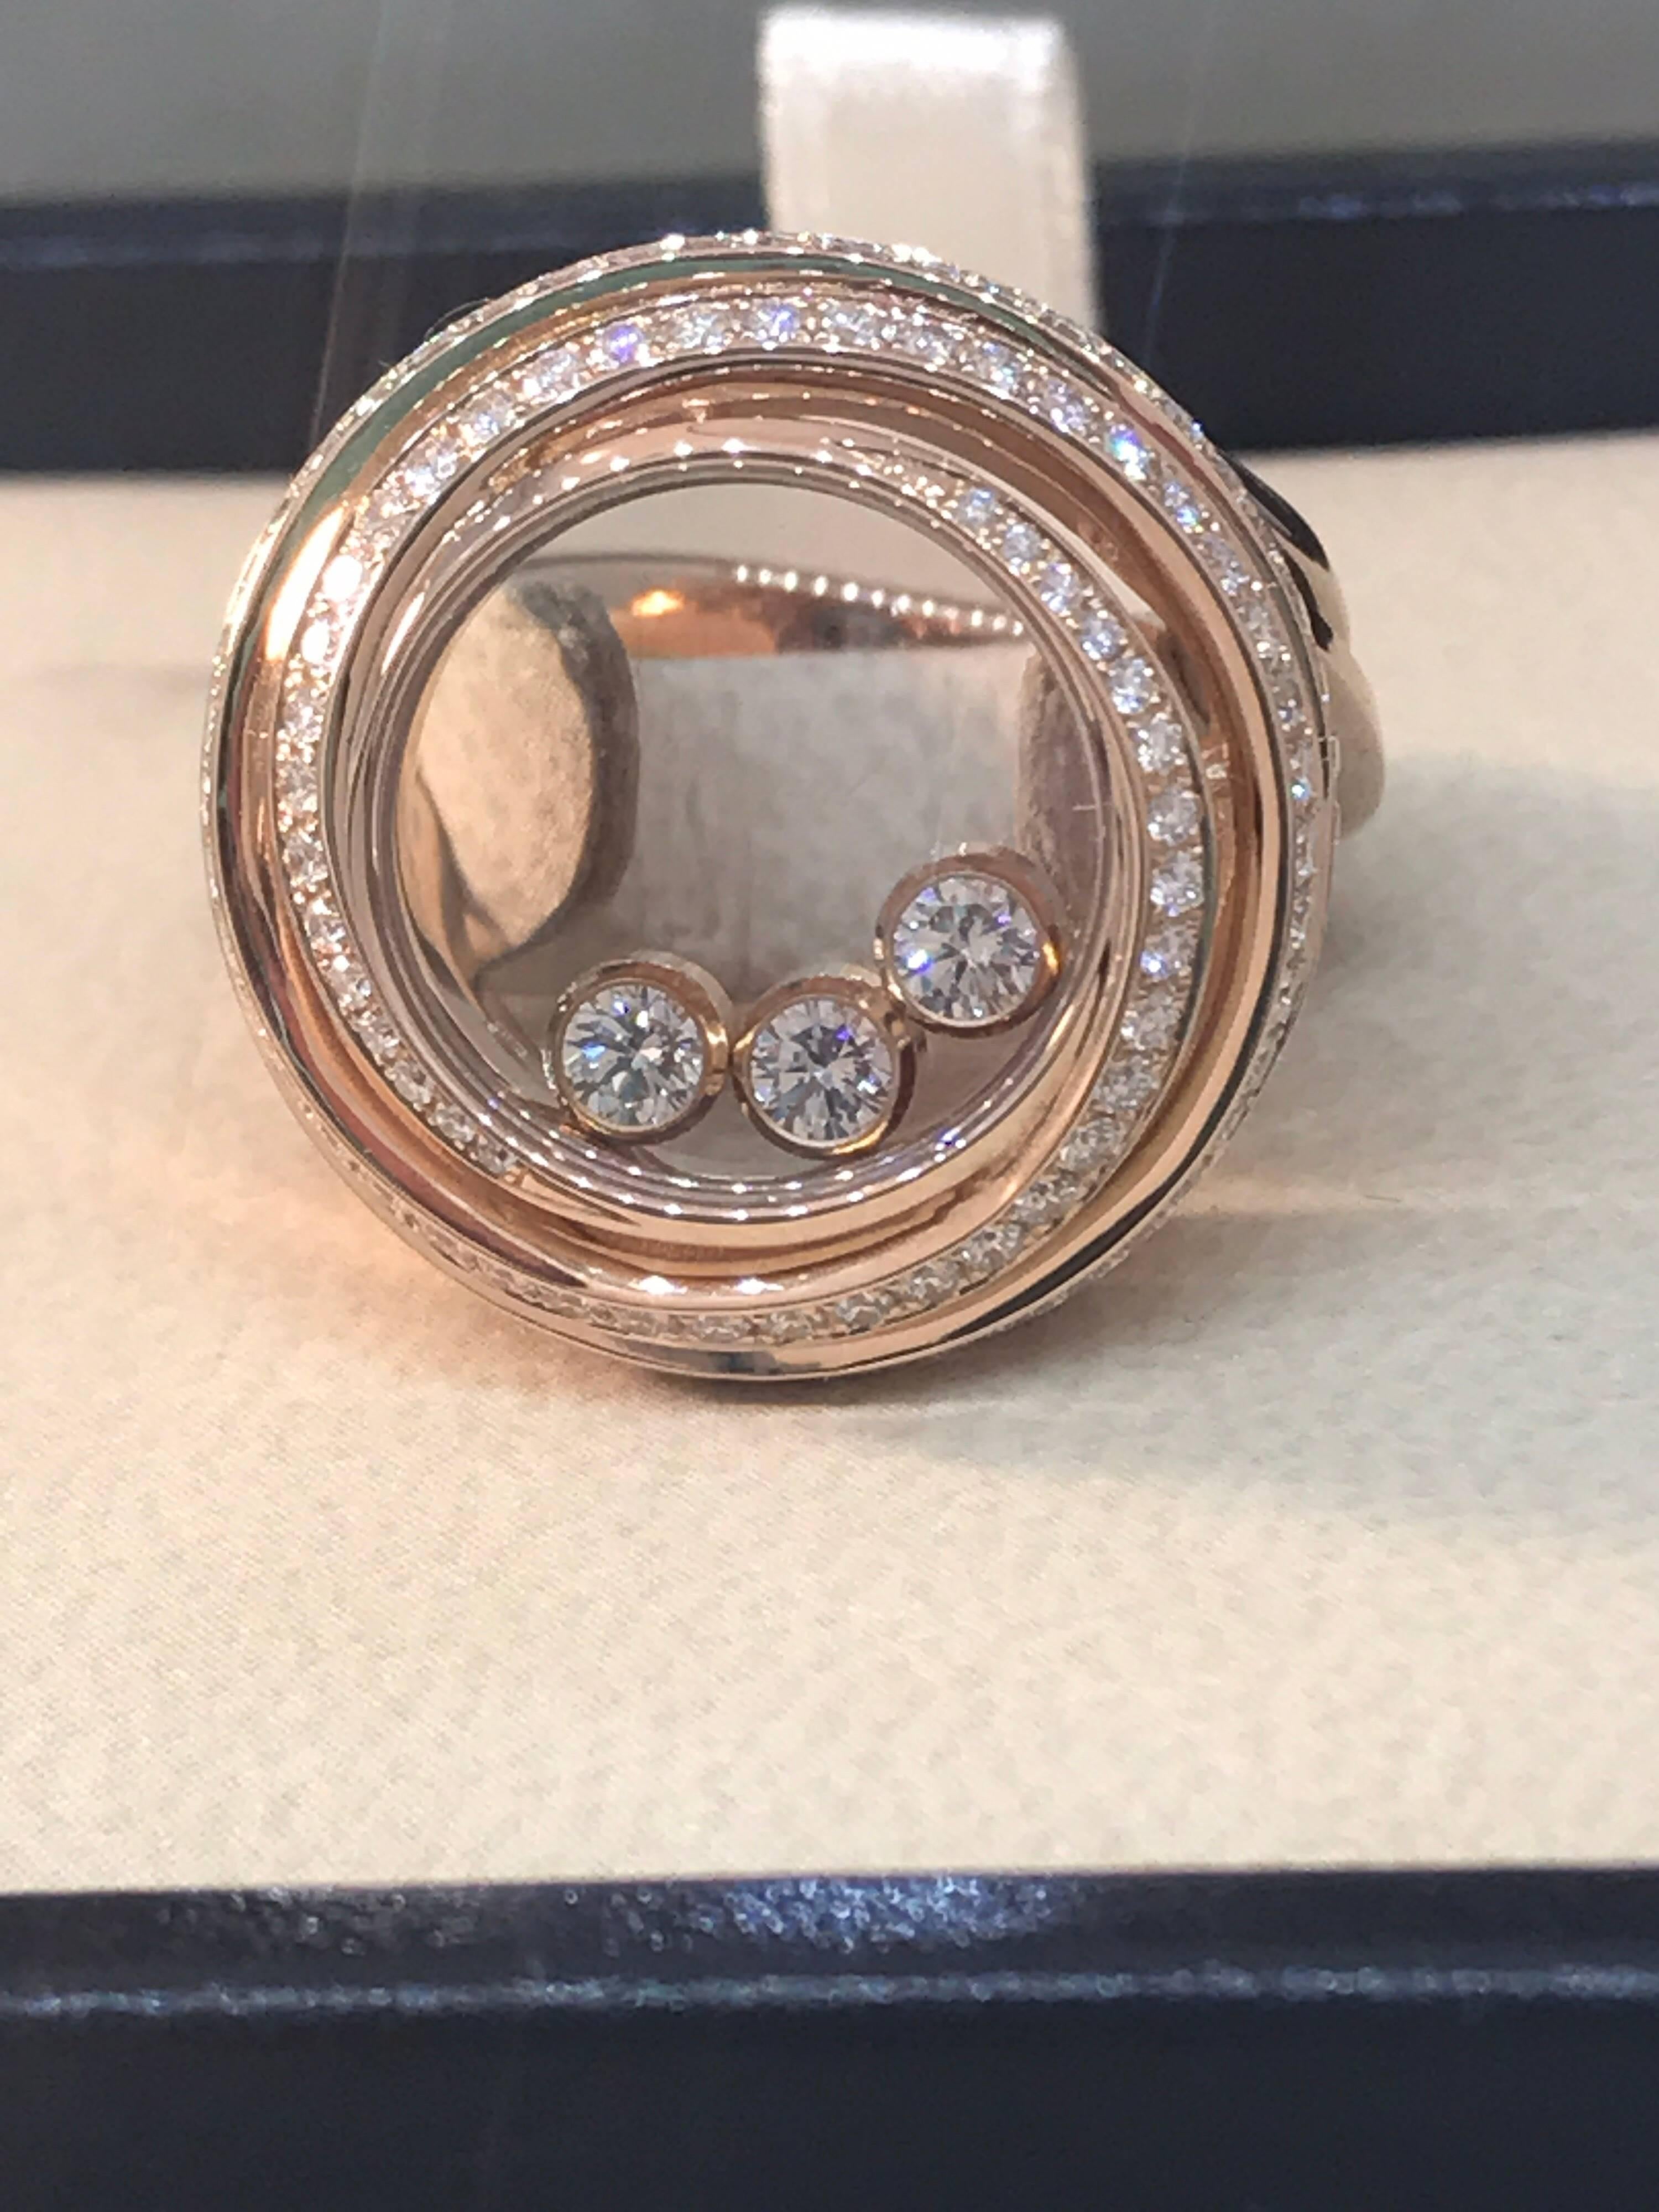 Chopard Happy Emotions Ring

Model Number: 82/9217-5039

100% Authentic

Brand New

Comes with original Chopard box, certificate of authenticity and warranty, and jewels manual

18 Karat Rose Gold

Ring Weight: 13.86gr

Size 6.5 / 53

138 Diamonds